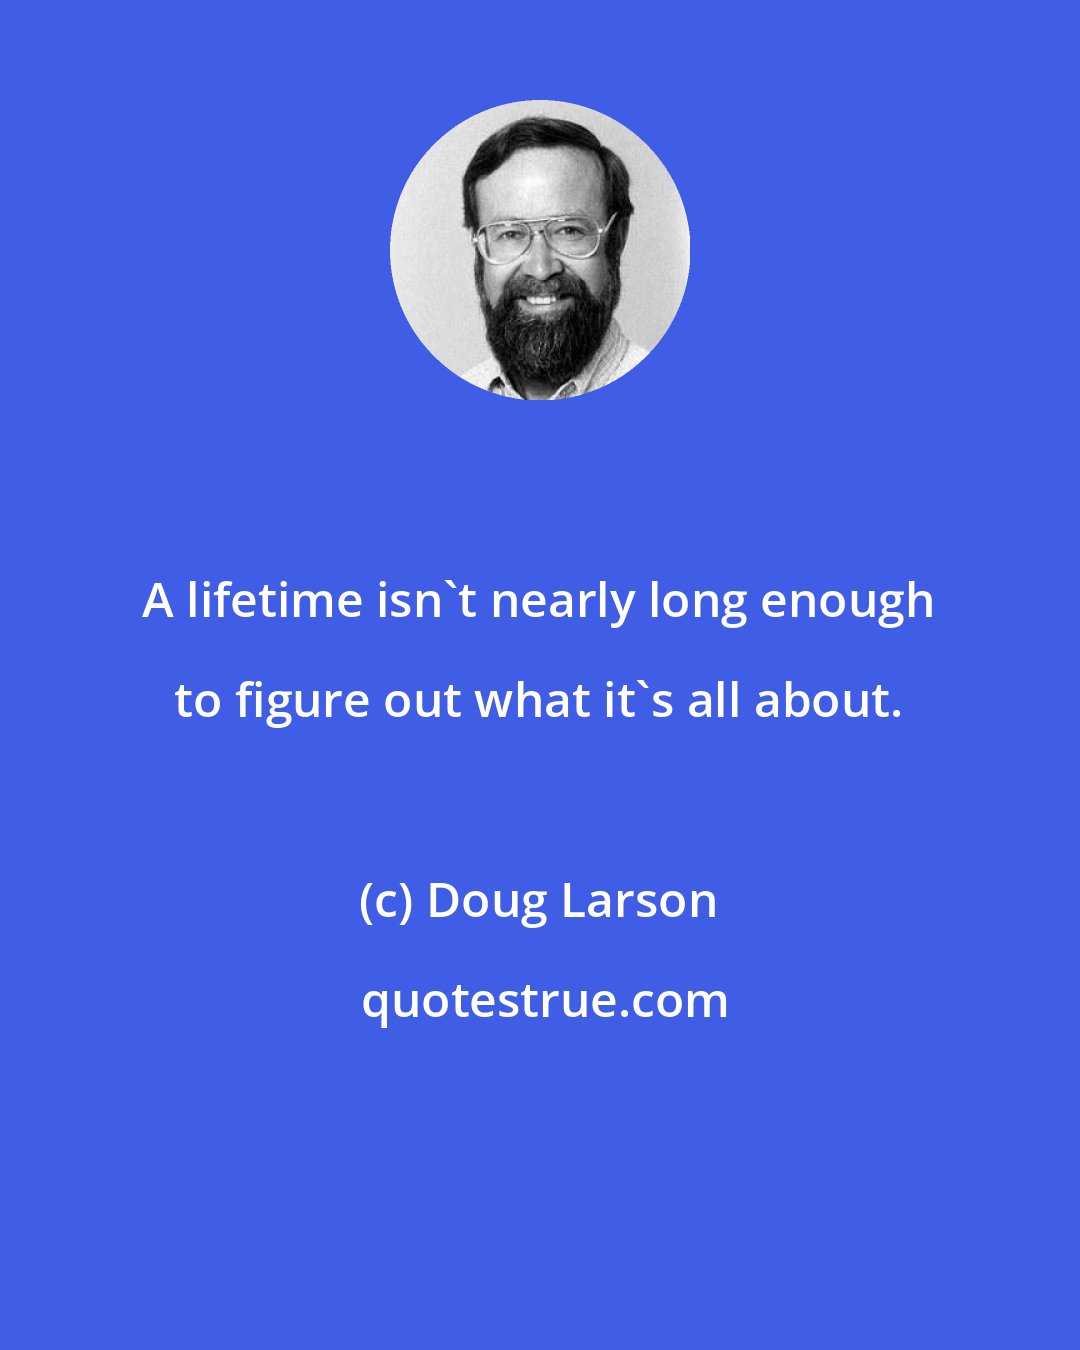 Doug Larson: A lifetime isn't nearly long enough to figure out what it's all about.